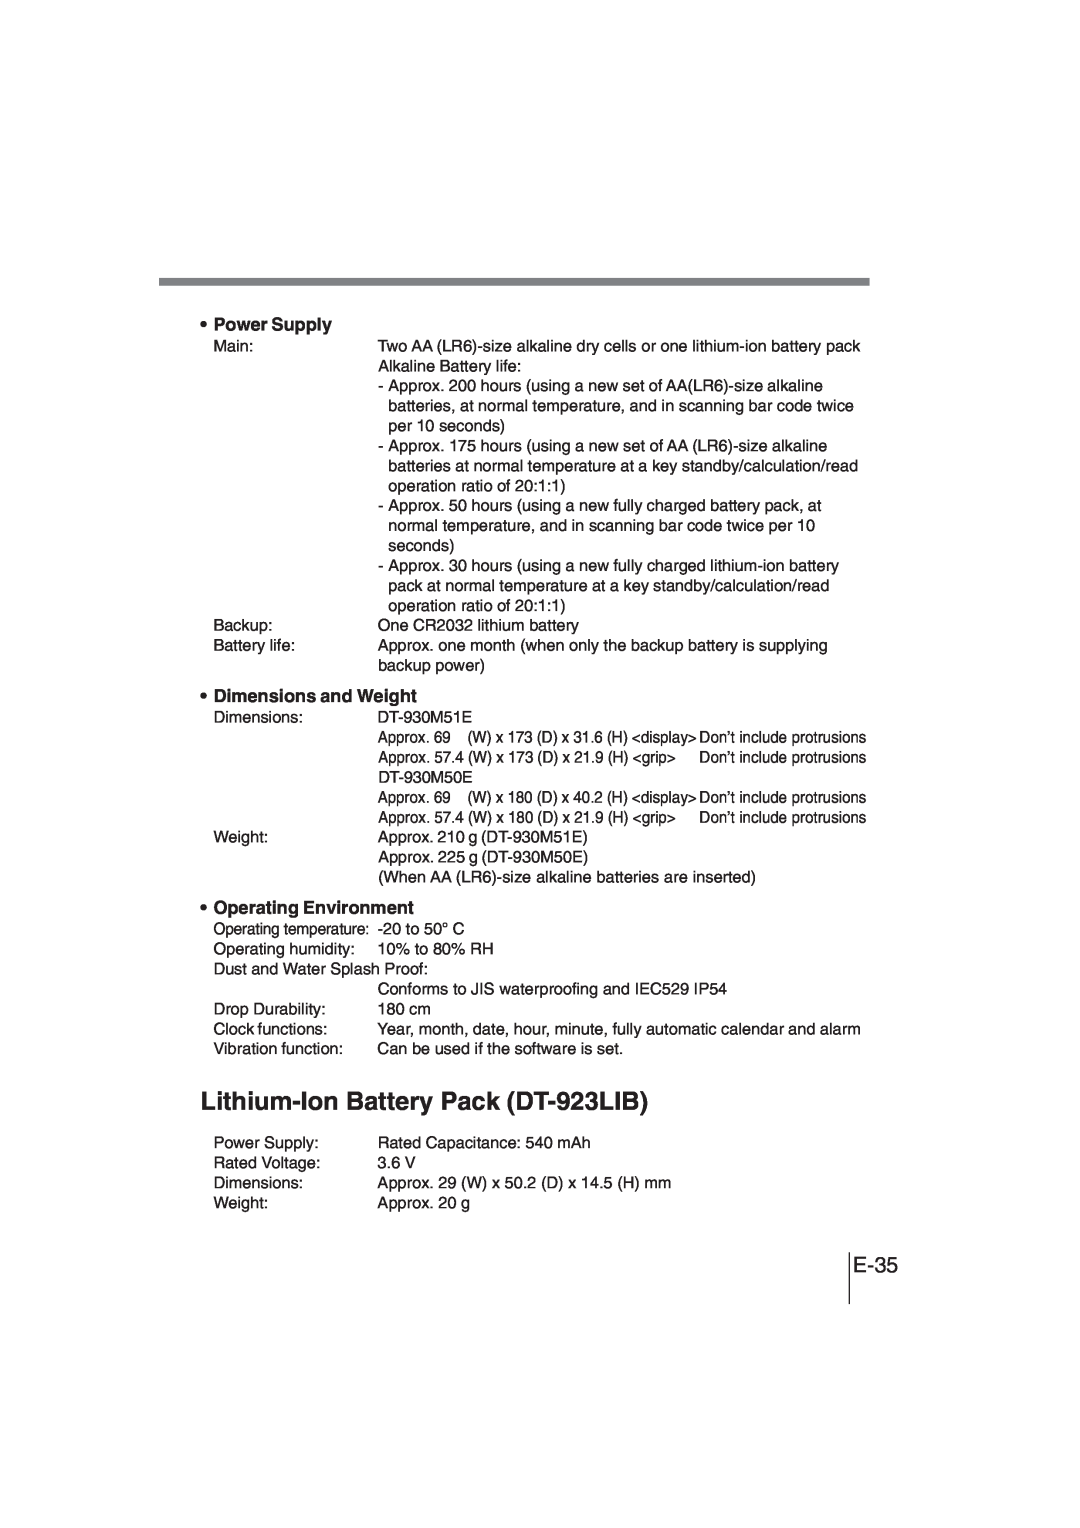 Casio DT-930 manual Lithium-IonBattery Pack DT-923LIB, E-35, Power Supply, Dimensions and Weight, Operating Environment 